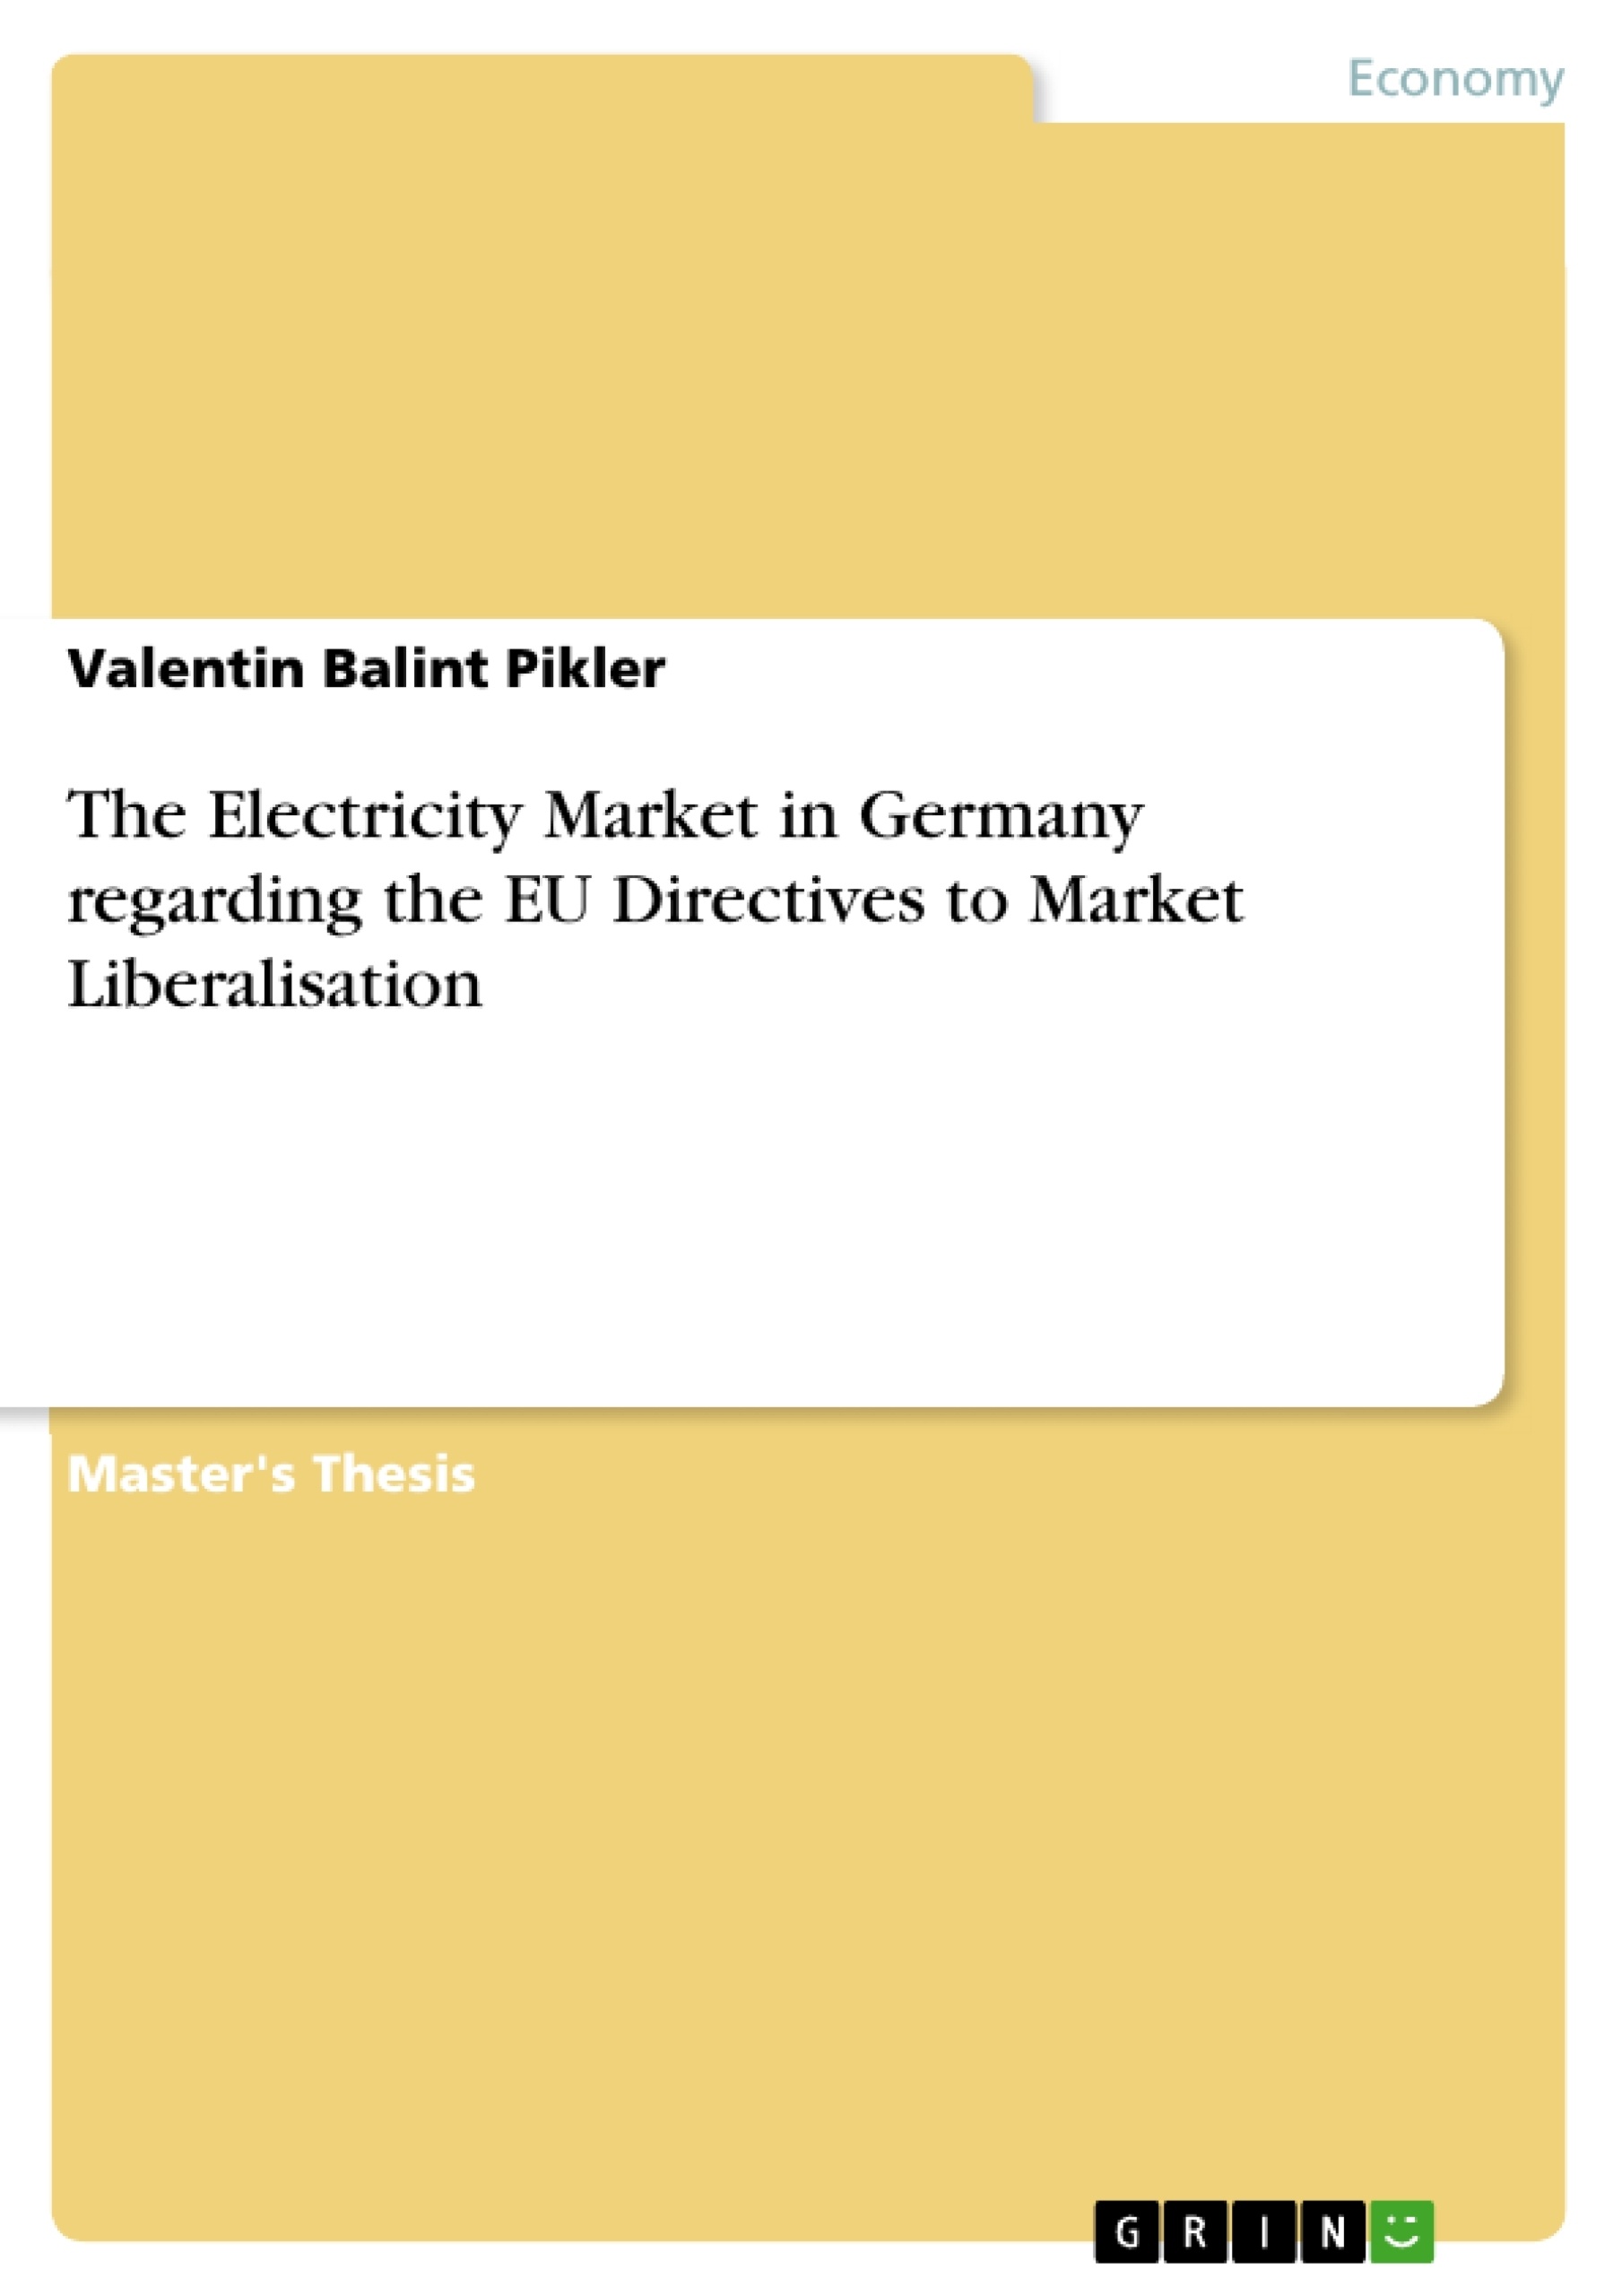 Titre: The Electricity Market in Germany regarding the EU Directives to Market Liberalisation